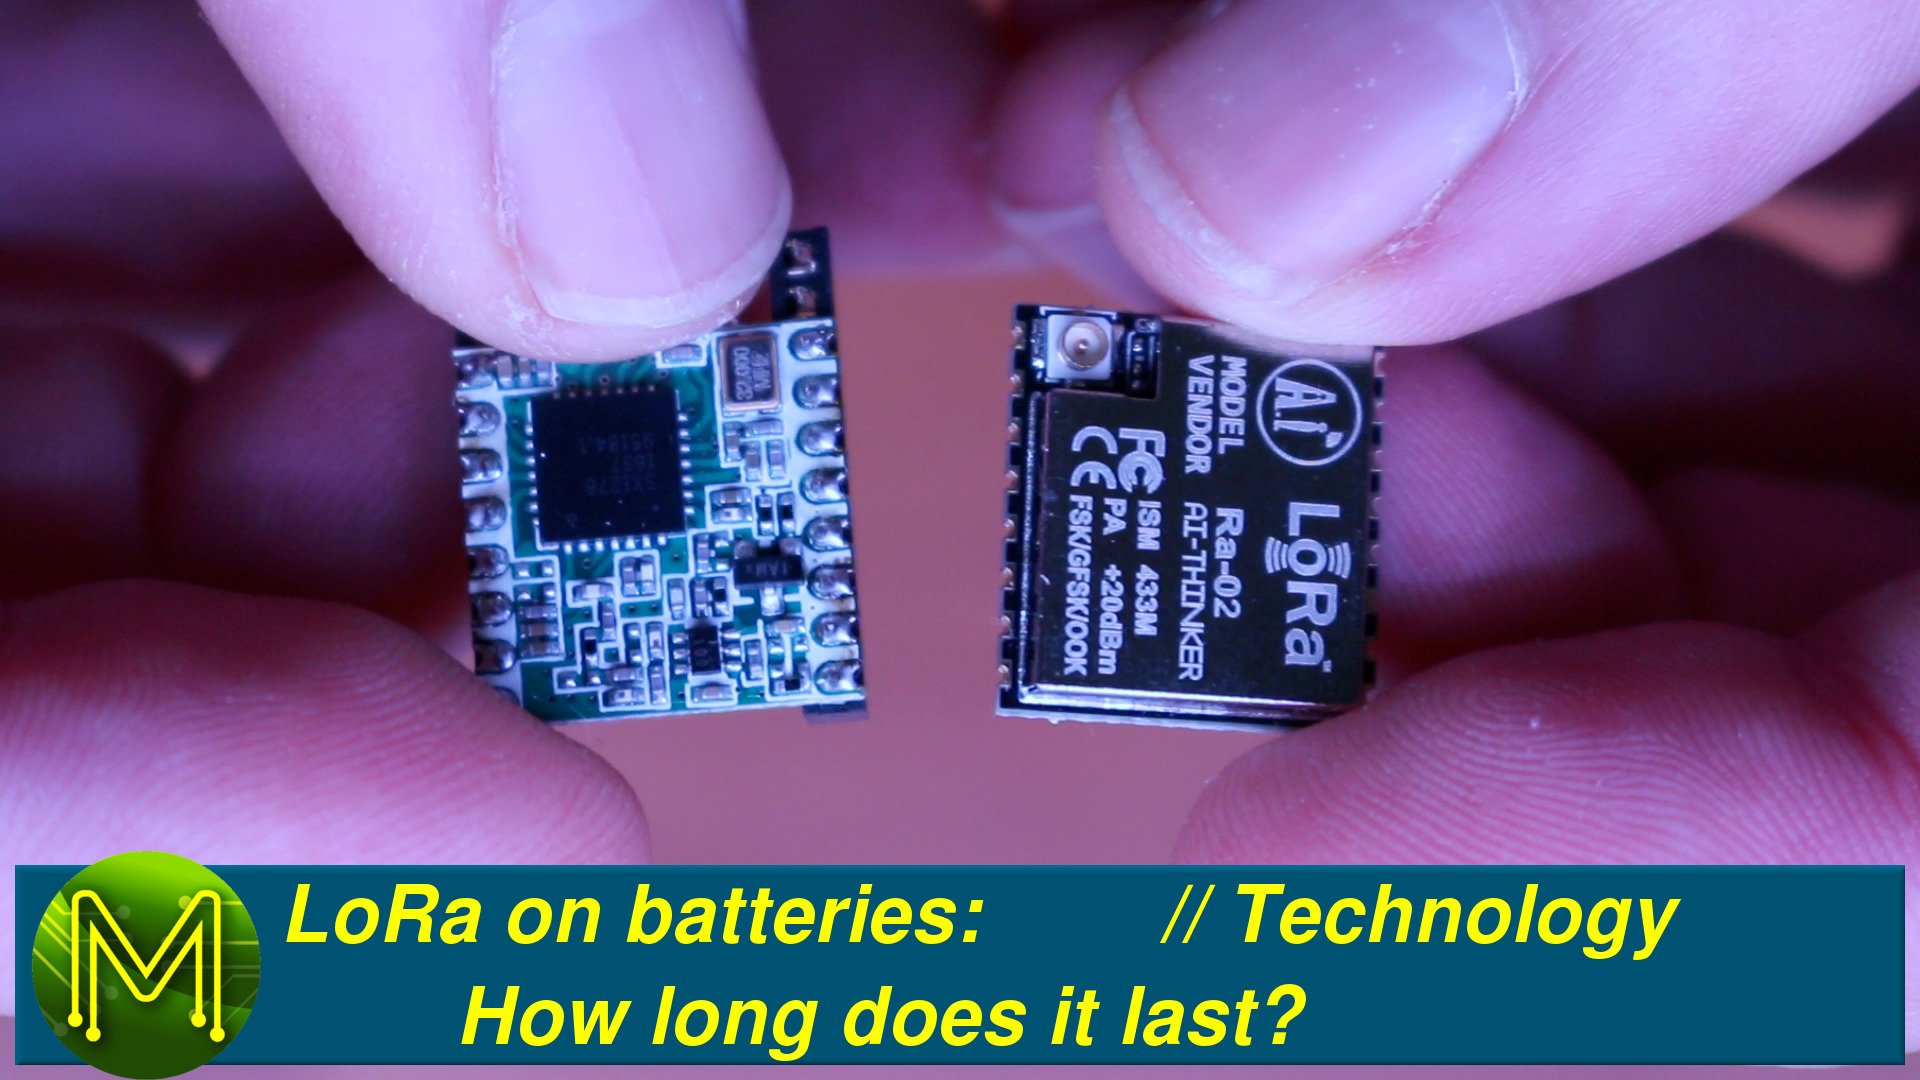 LoRa on batteries: How long does it last? // Technology